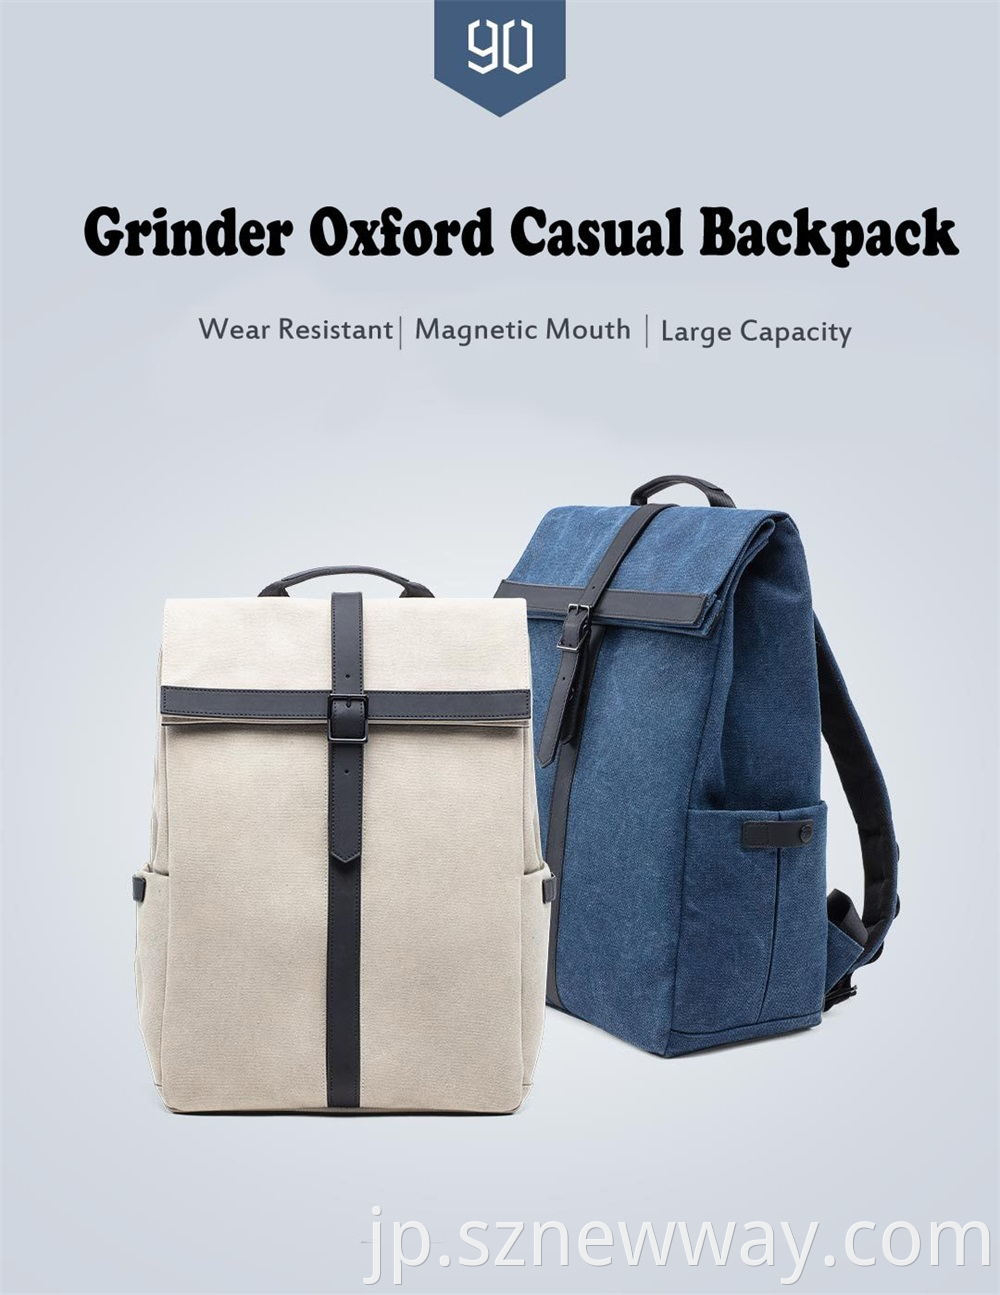 90fun Grinder Oxford Casual Backpack